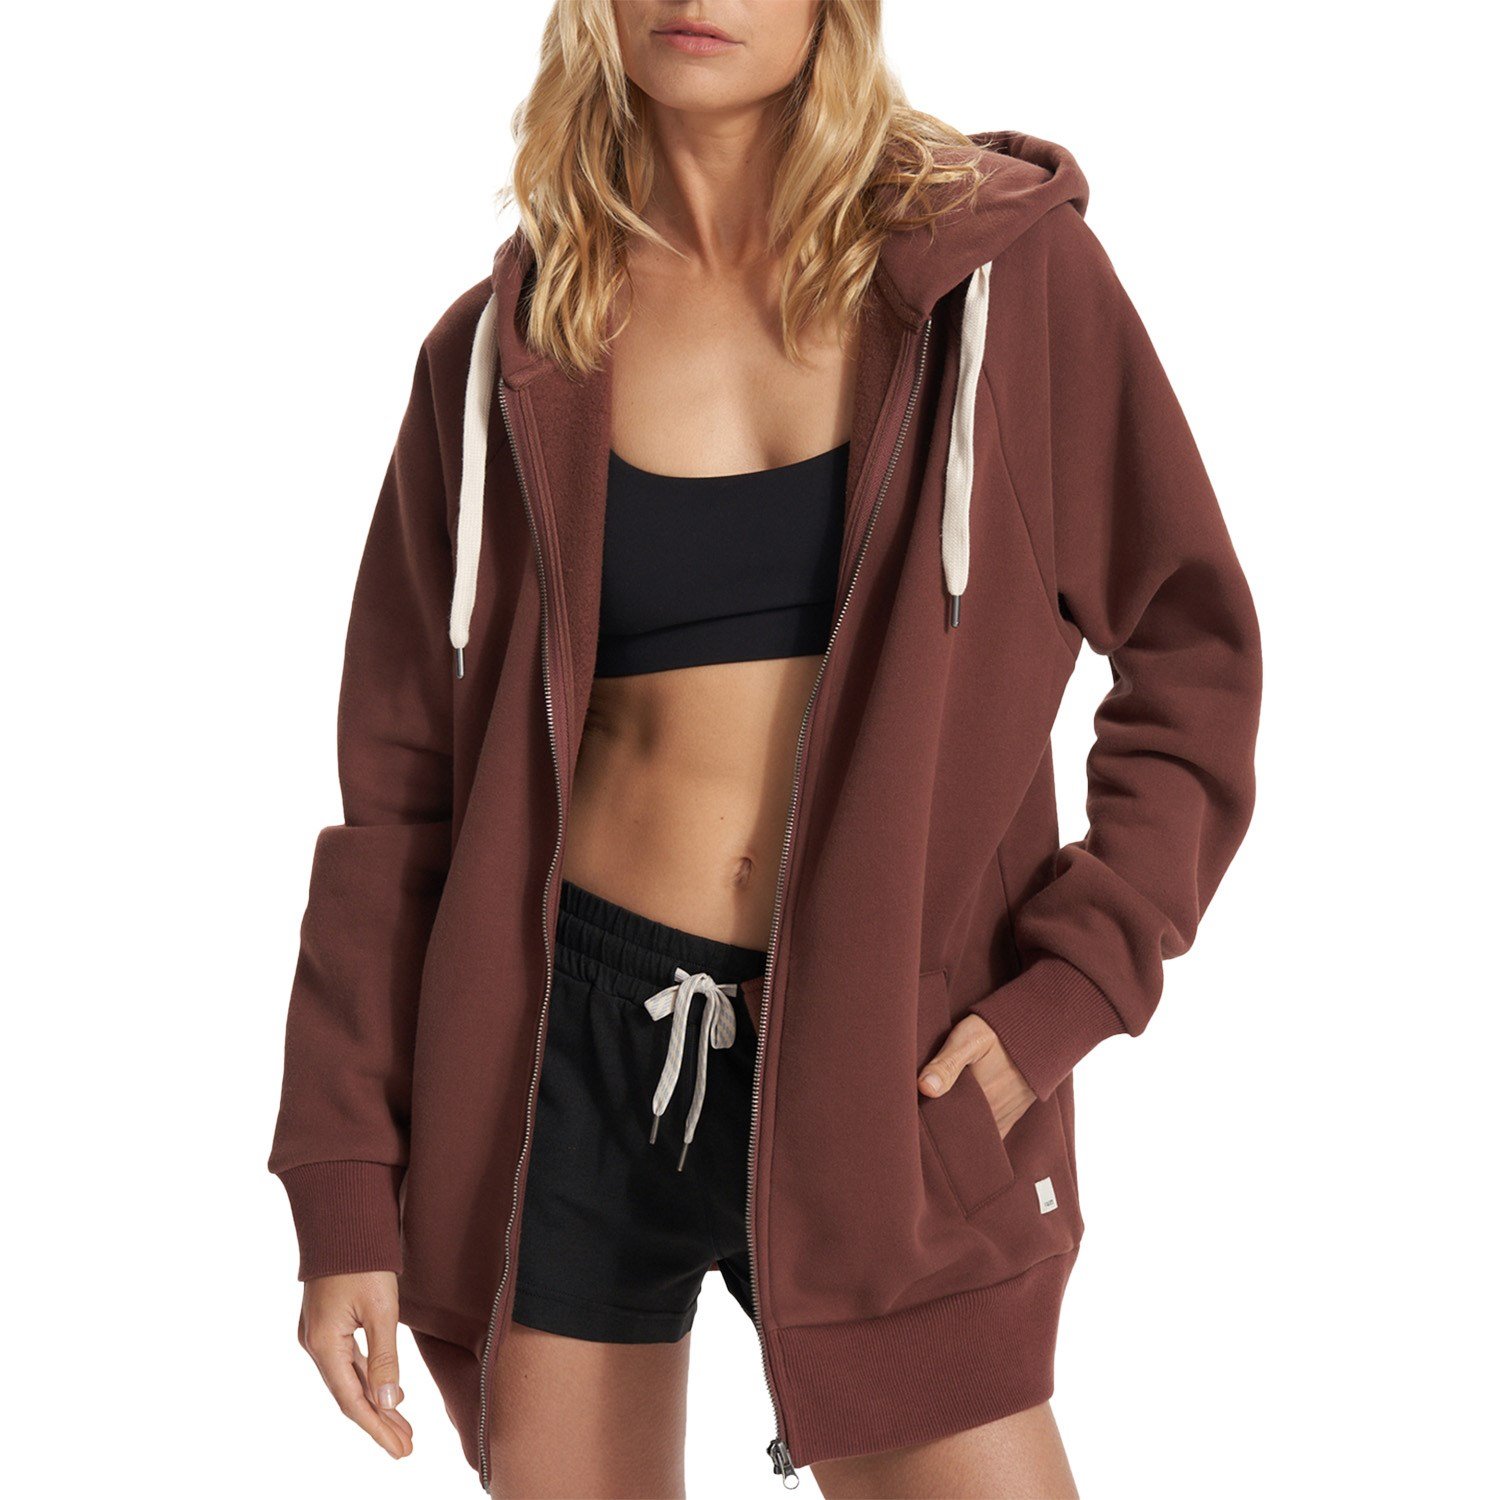 Restore Oversized Hoodie, Canyon Clay